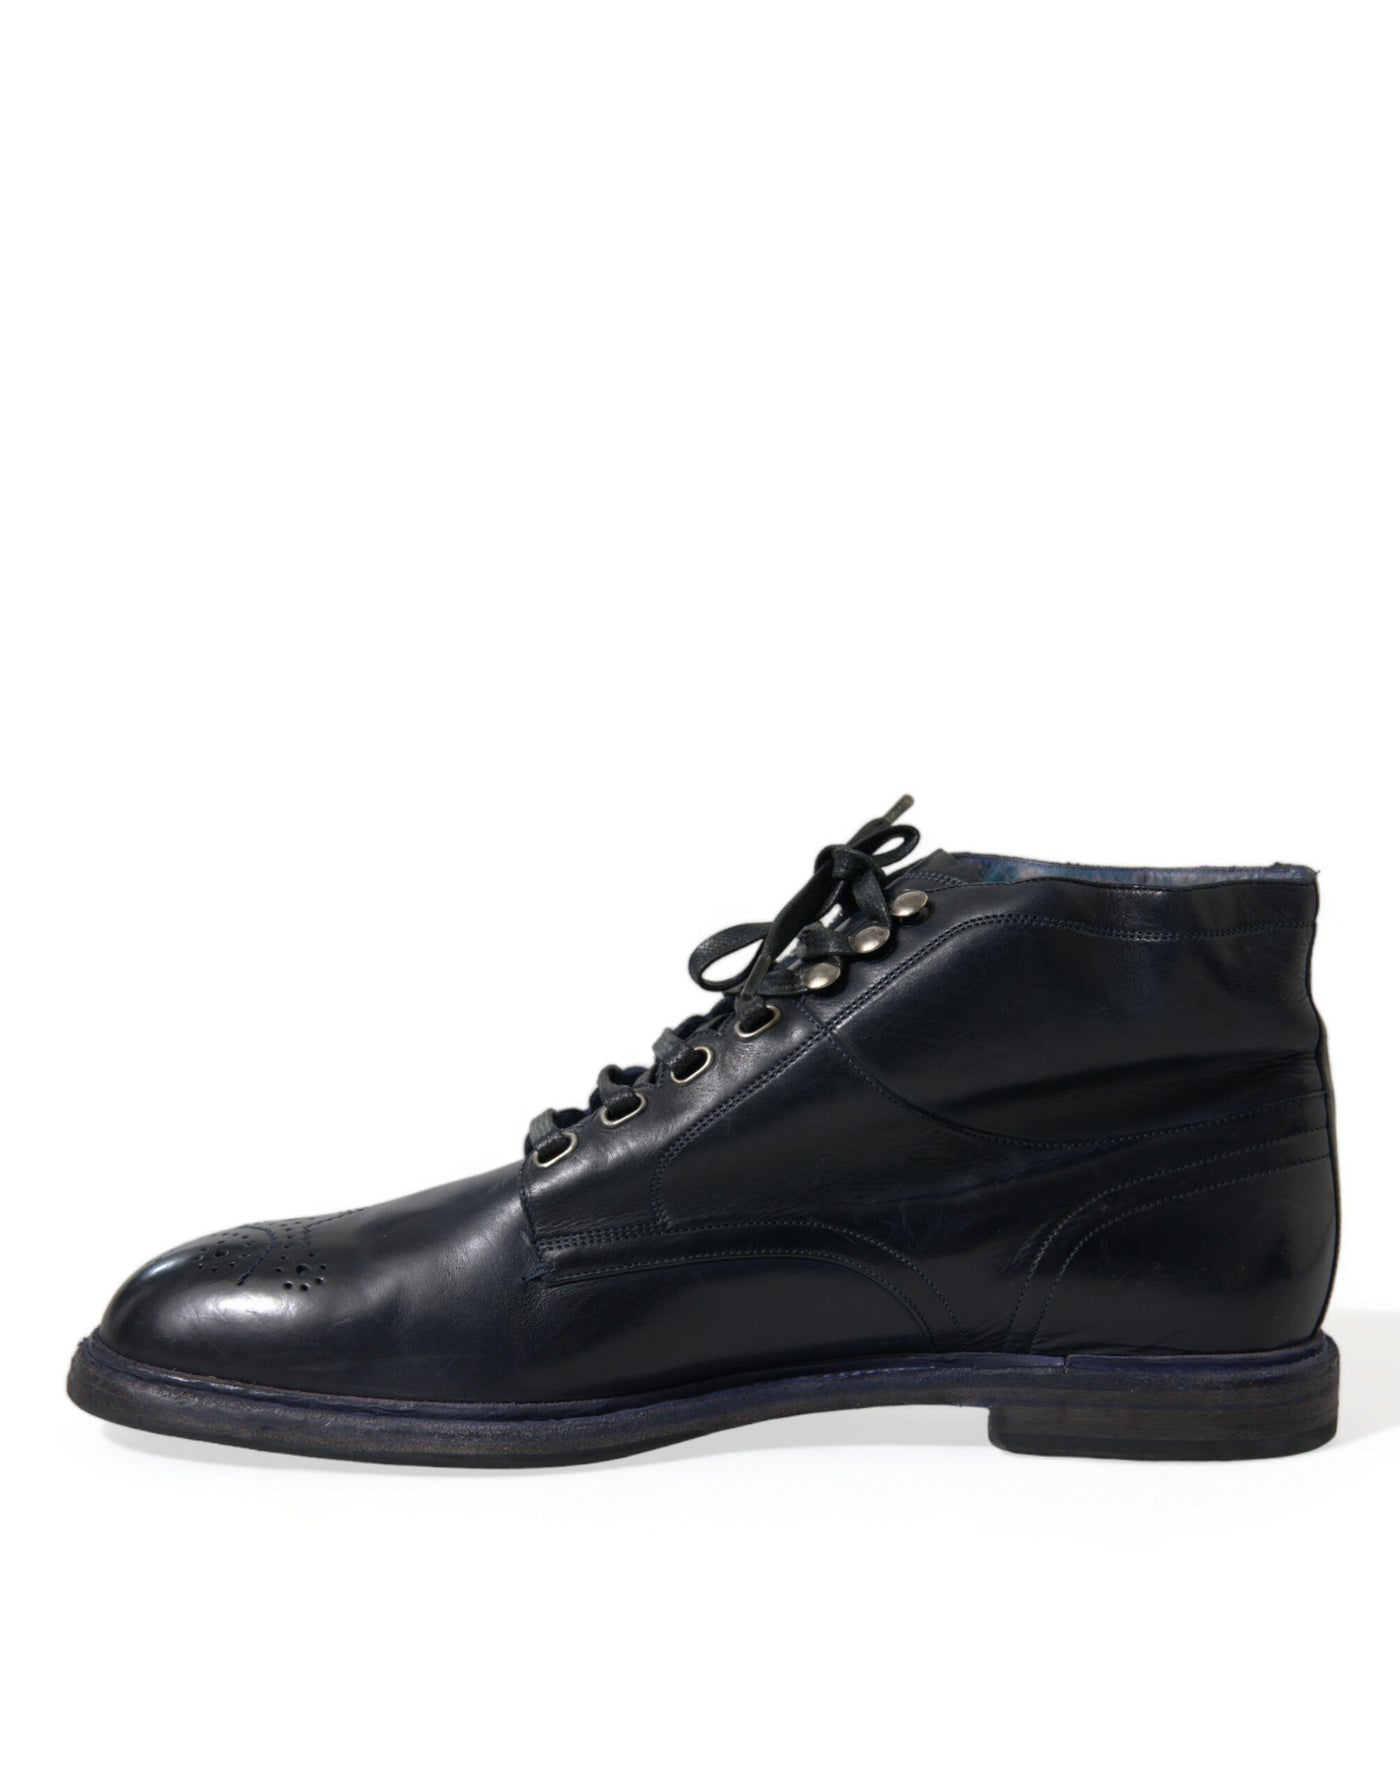 Navy Blue Leather Ankle Boots